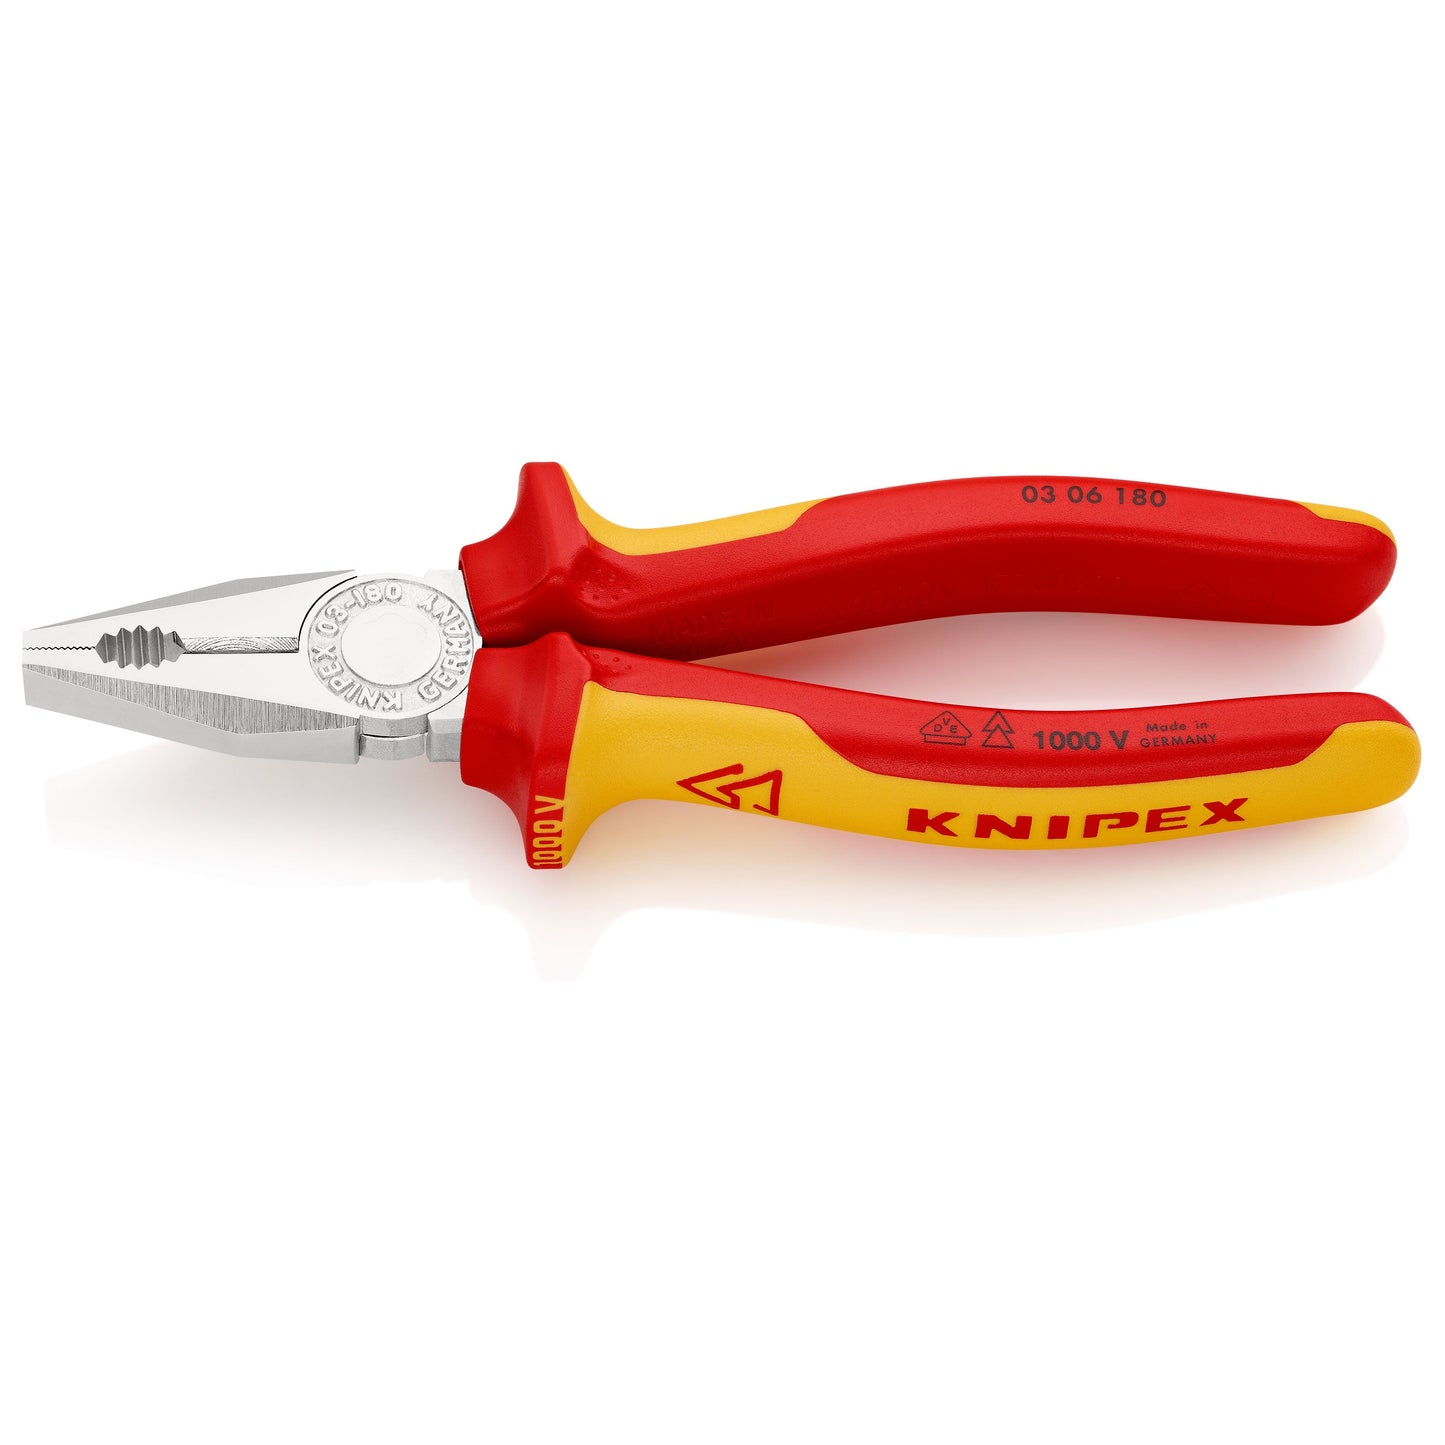 Knipex 03 06 180 - VDE insulated universal pliers 180 mm with two-component handles